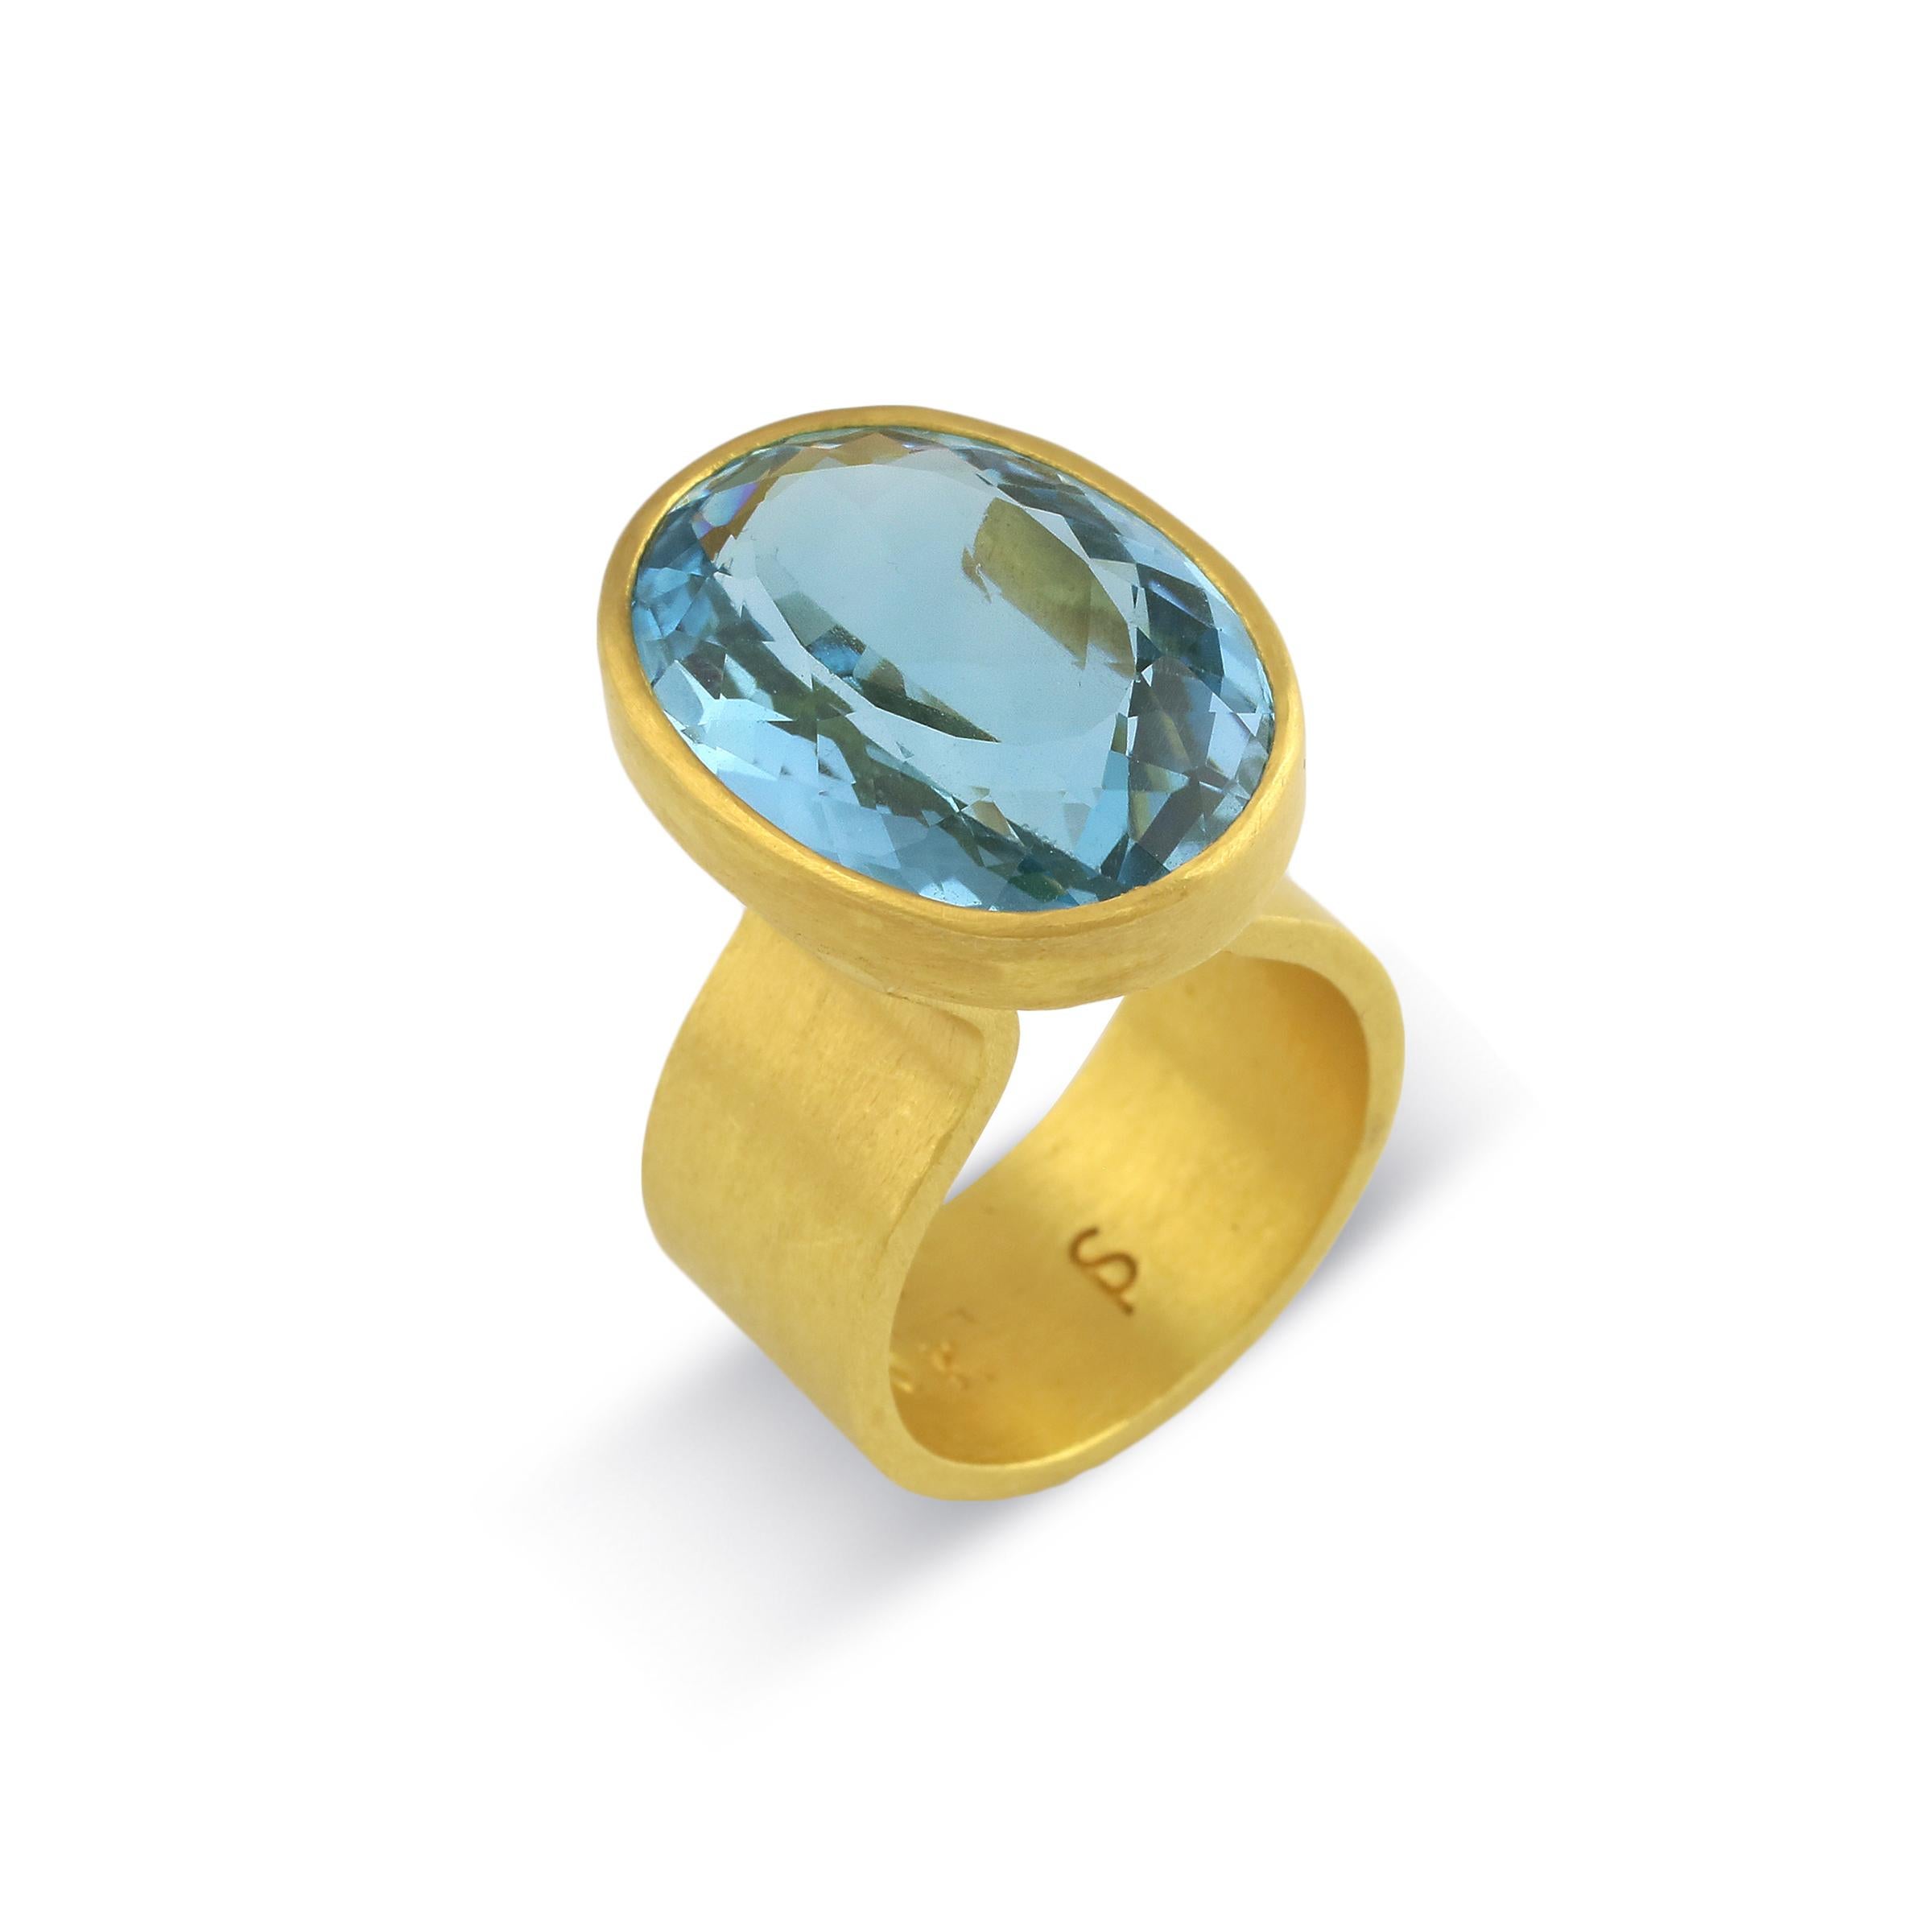 Artisan PHILIPPE SPENCER 19.25 Ct. Blue Topaz in 22K and 20K Gold Statement Ring